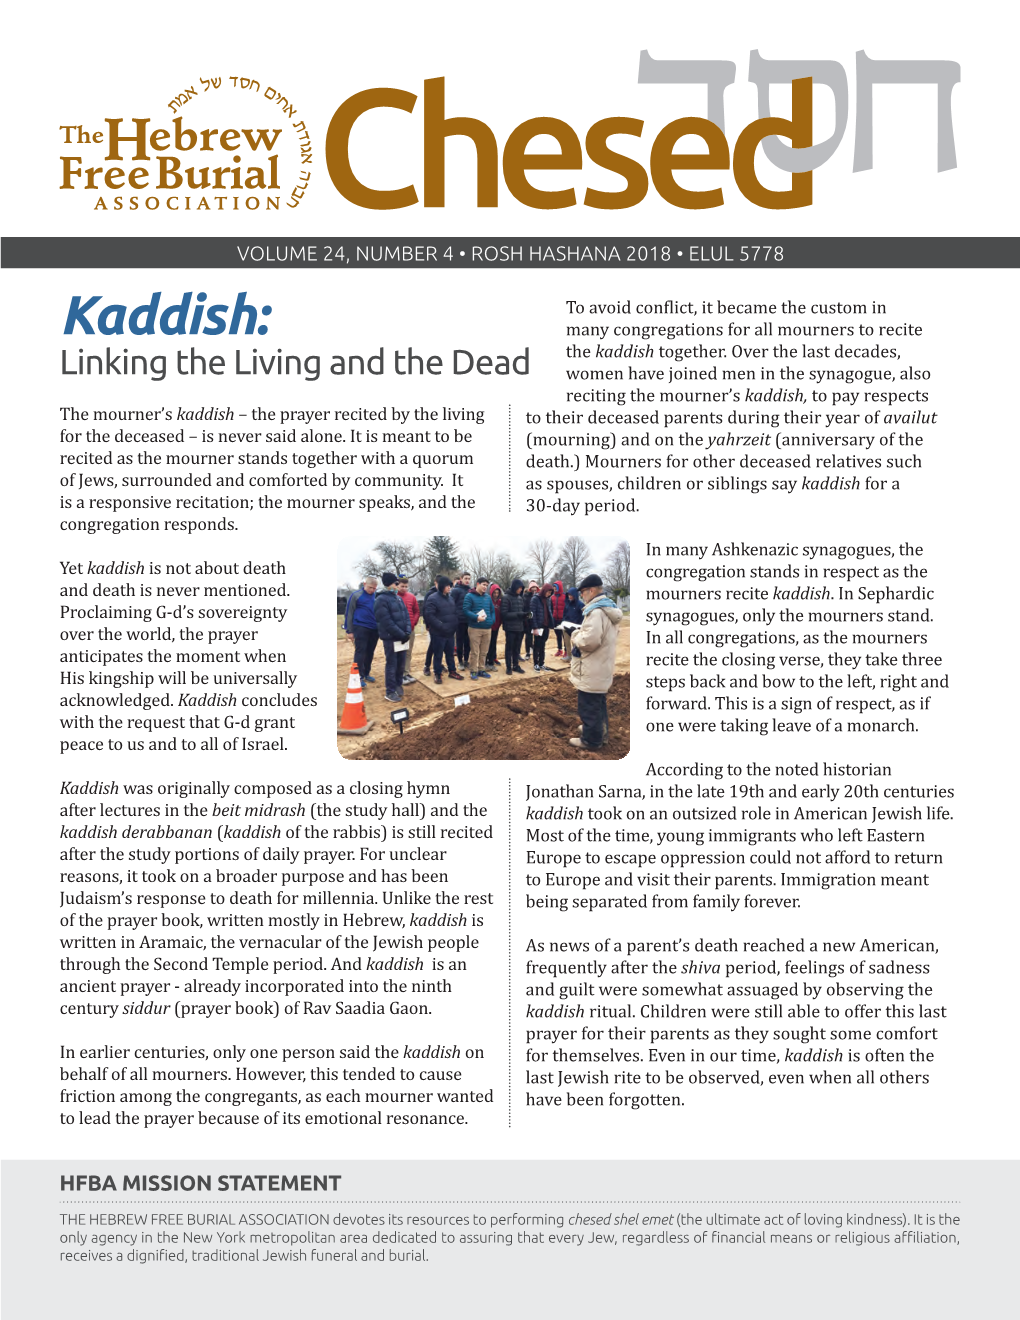 Kaddish: Many Congregations for All Mourners to Recite Theto Avoid Kaddish Conflict, Together